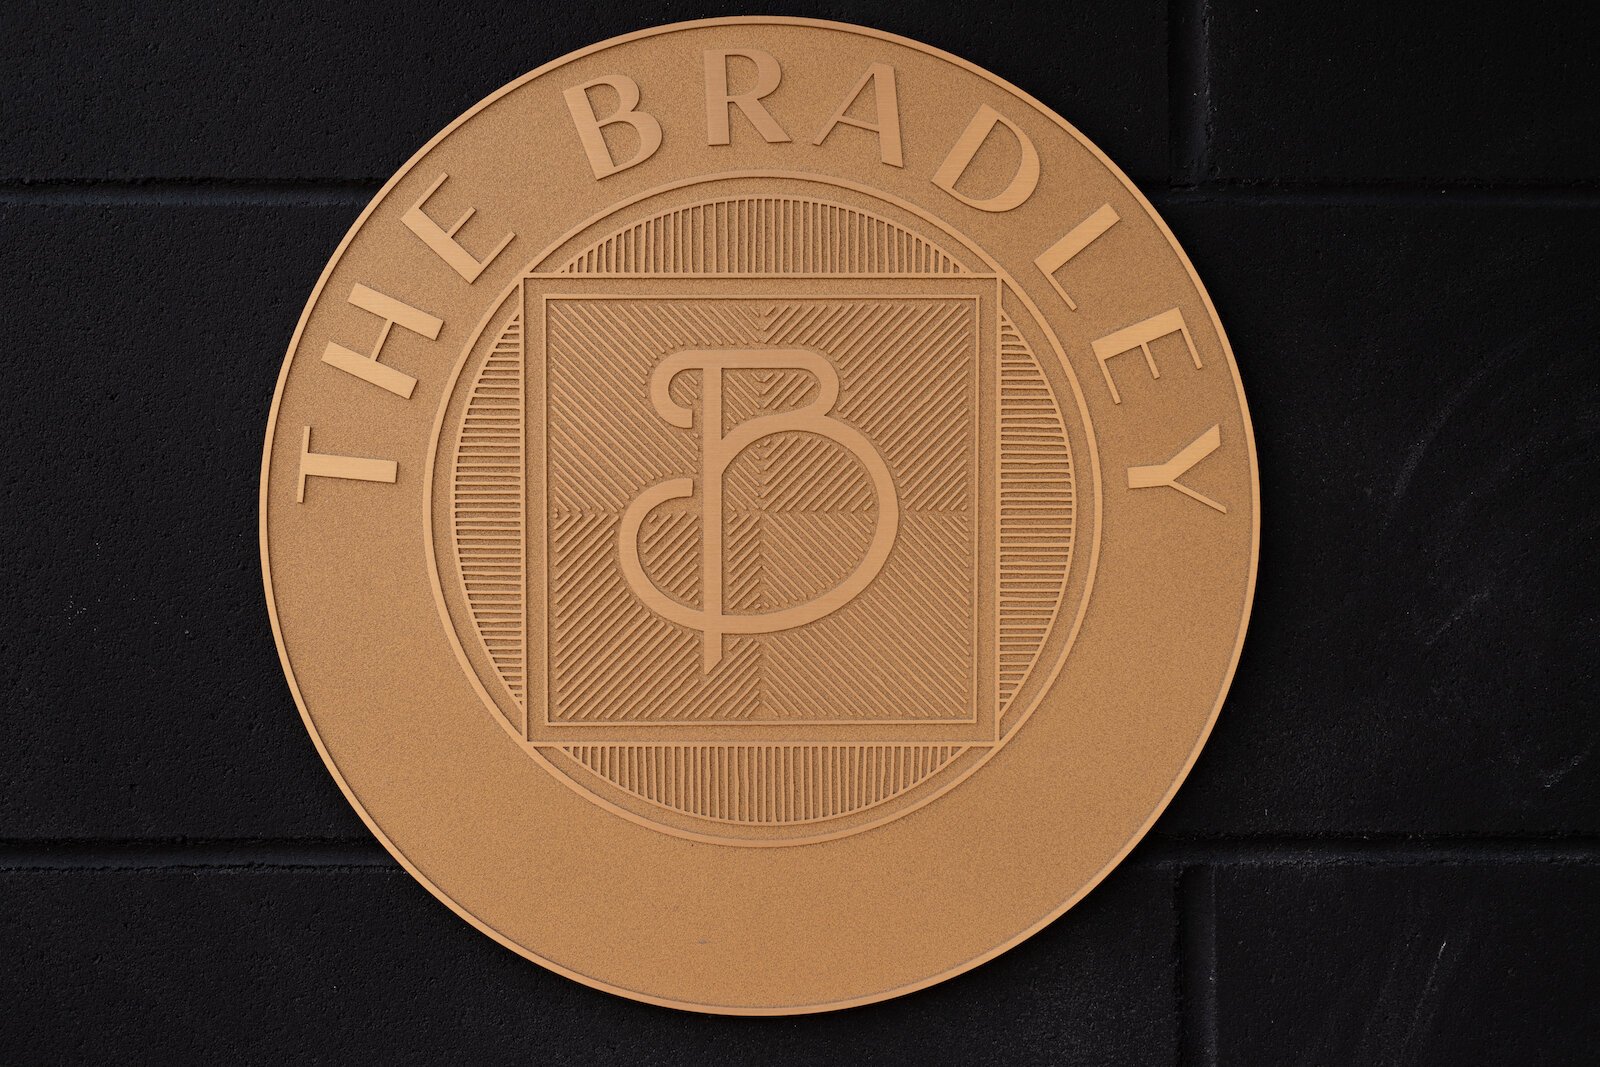 The Bradley is located at 204 W. Main St.